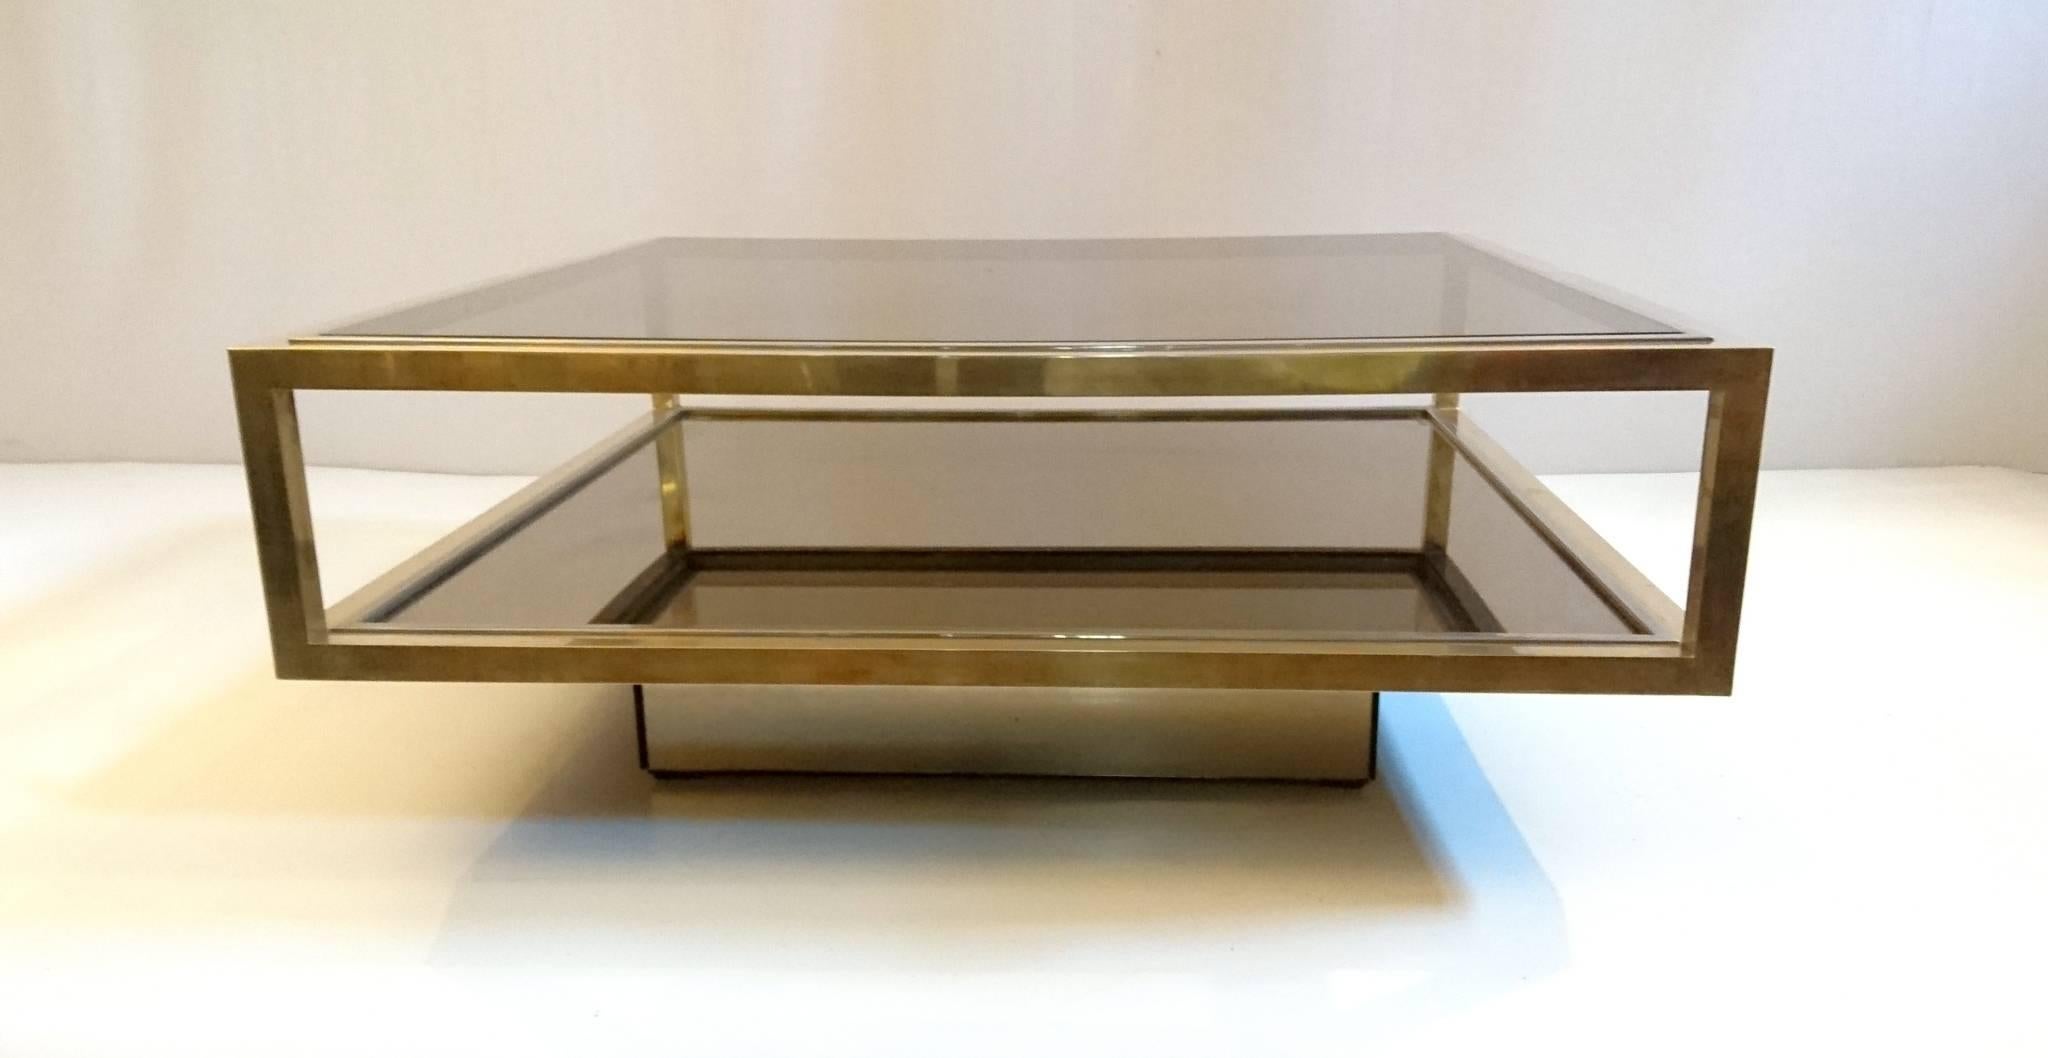 Elegant coffee table with two levels in glass and glass. The frame is made in brass and chrome and rests on a mirror covered base. Perfect for coffee table books. Excellent condition.